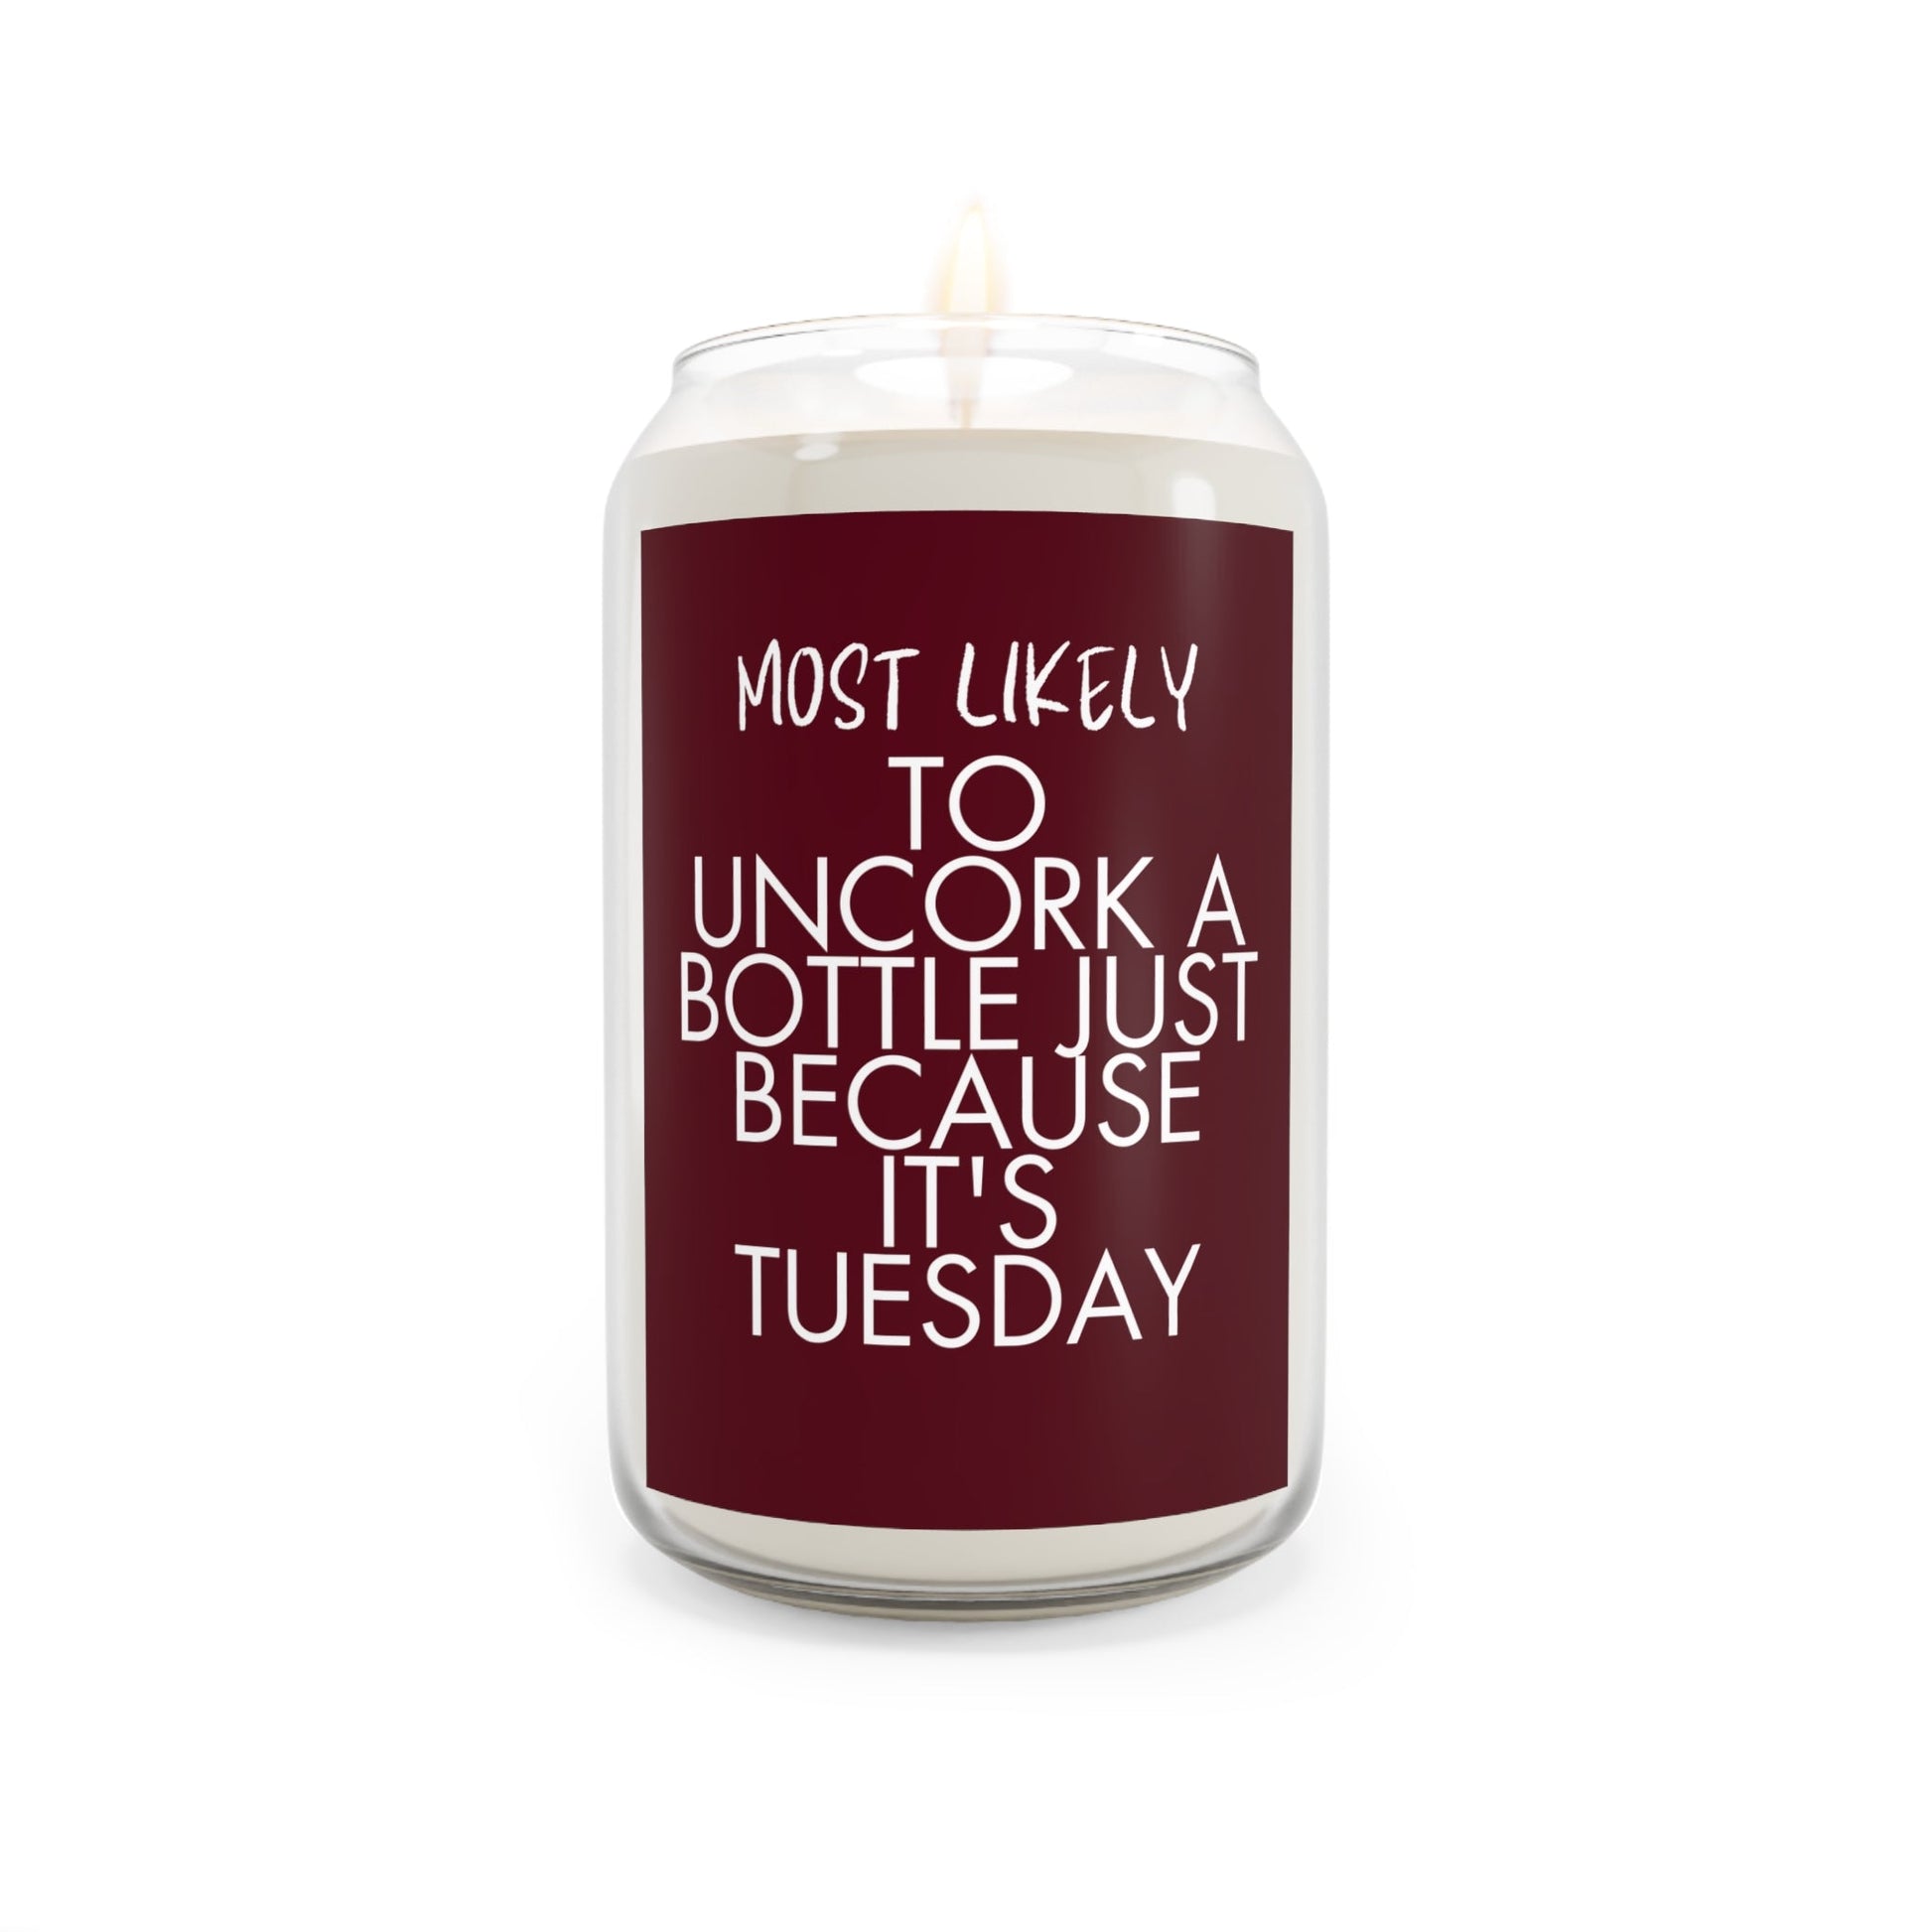 It’s Tuesday Wine Candle - Comfort Spice / 13.75oz Home